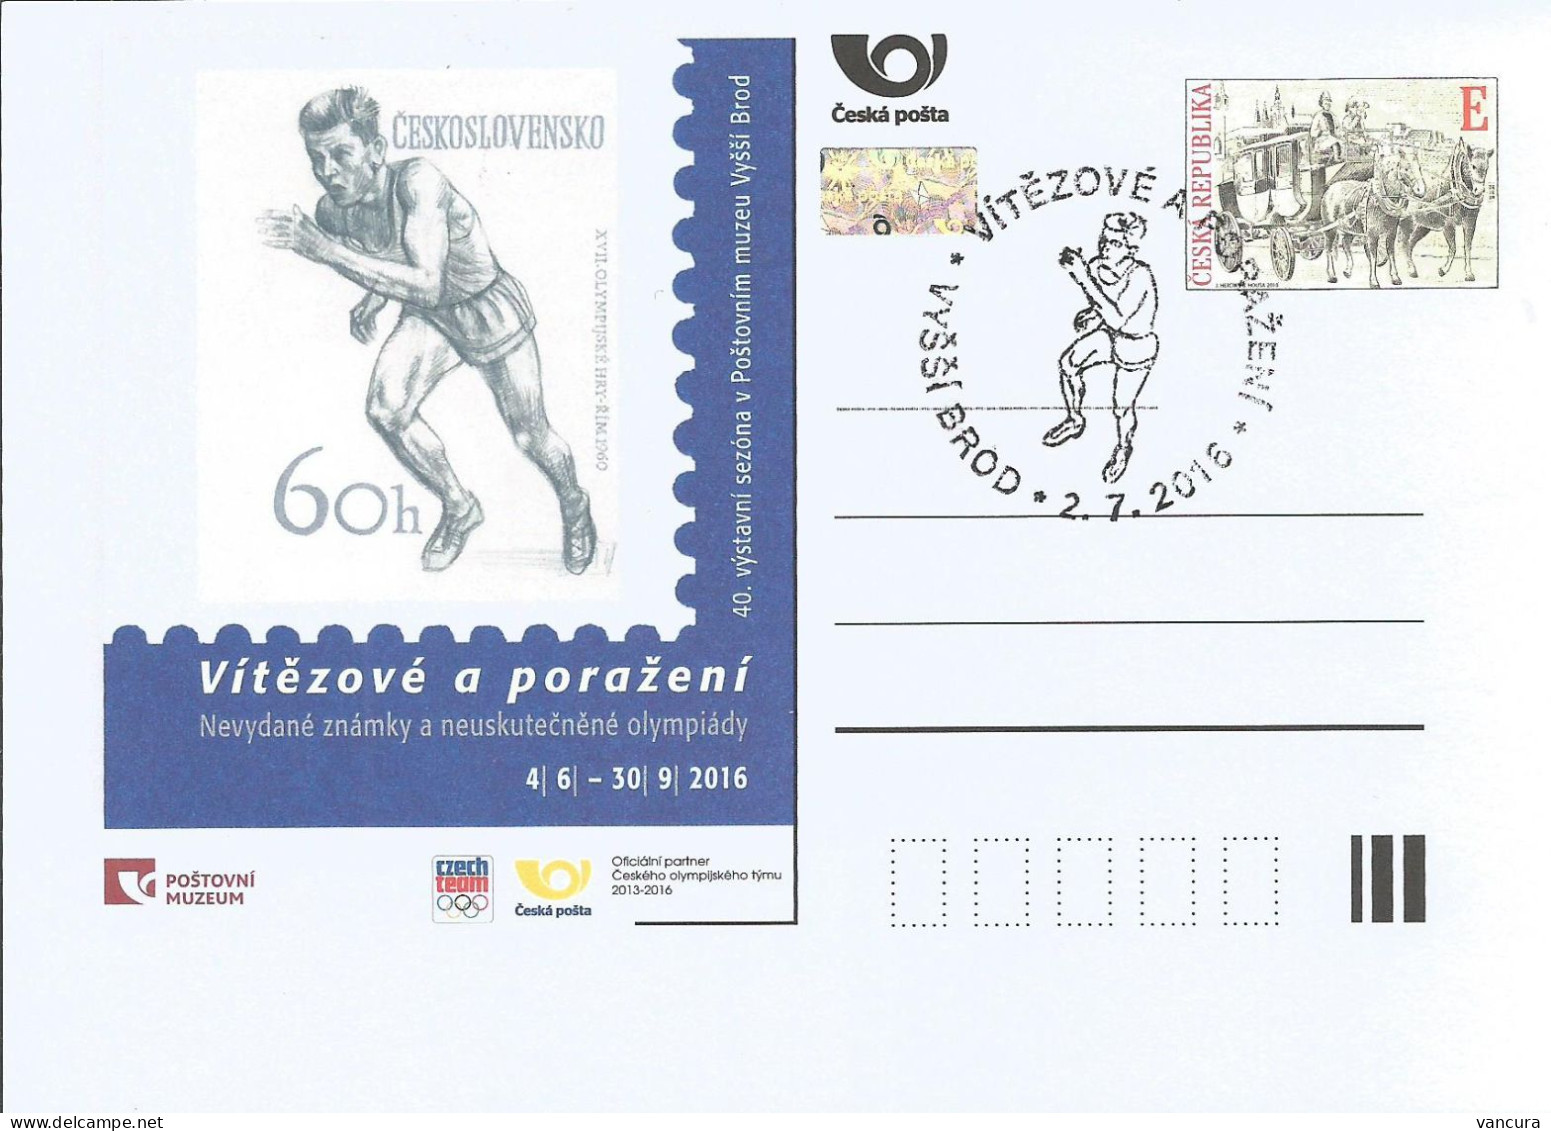 CDV PM 112 Czech Republic Exhibition In Post Museum In Vyssi Brod/Hohenfurth - Unissued Designs Of Olympic Stamps 2016 - Estate 1960: Roma